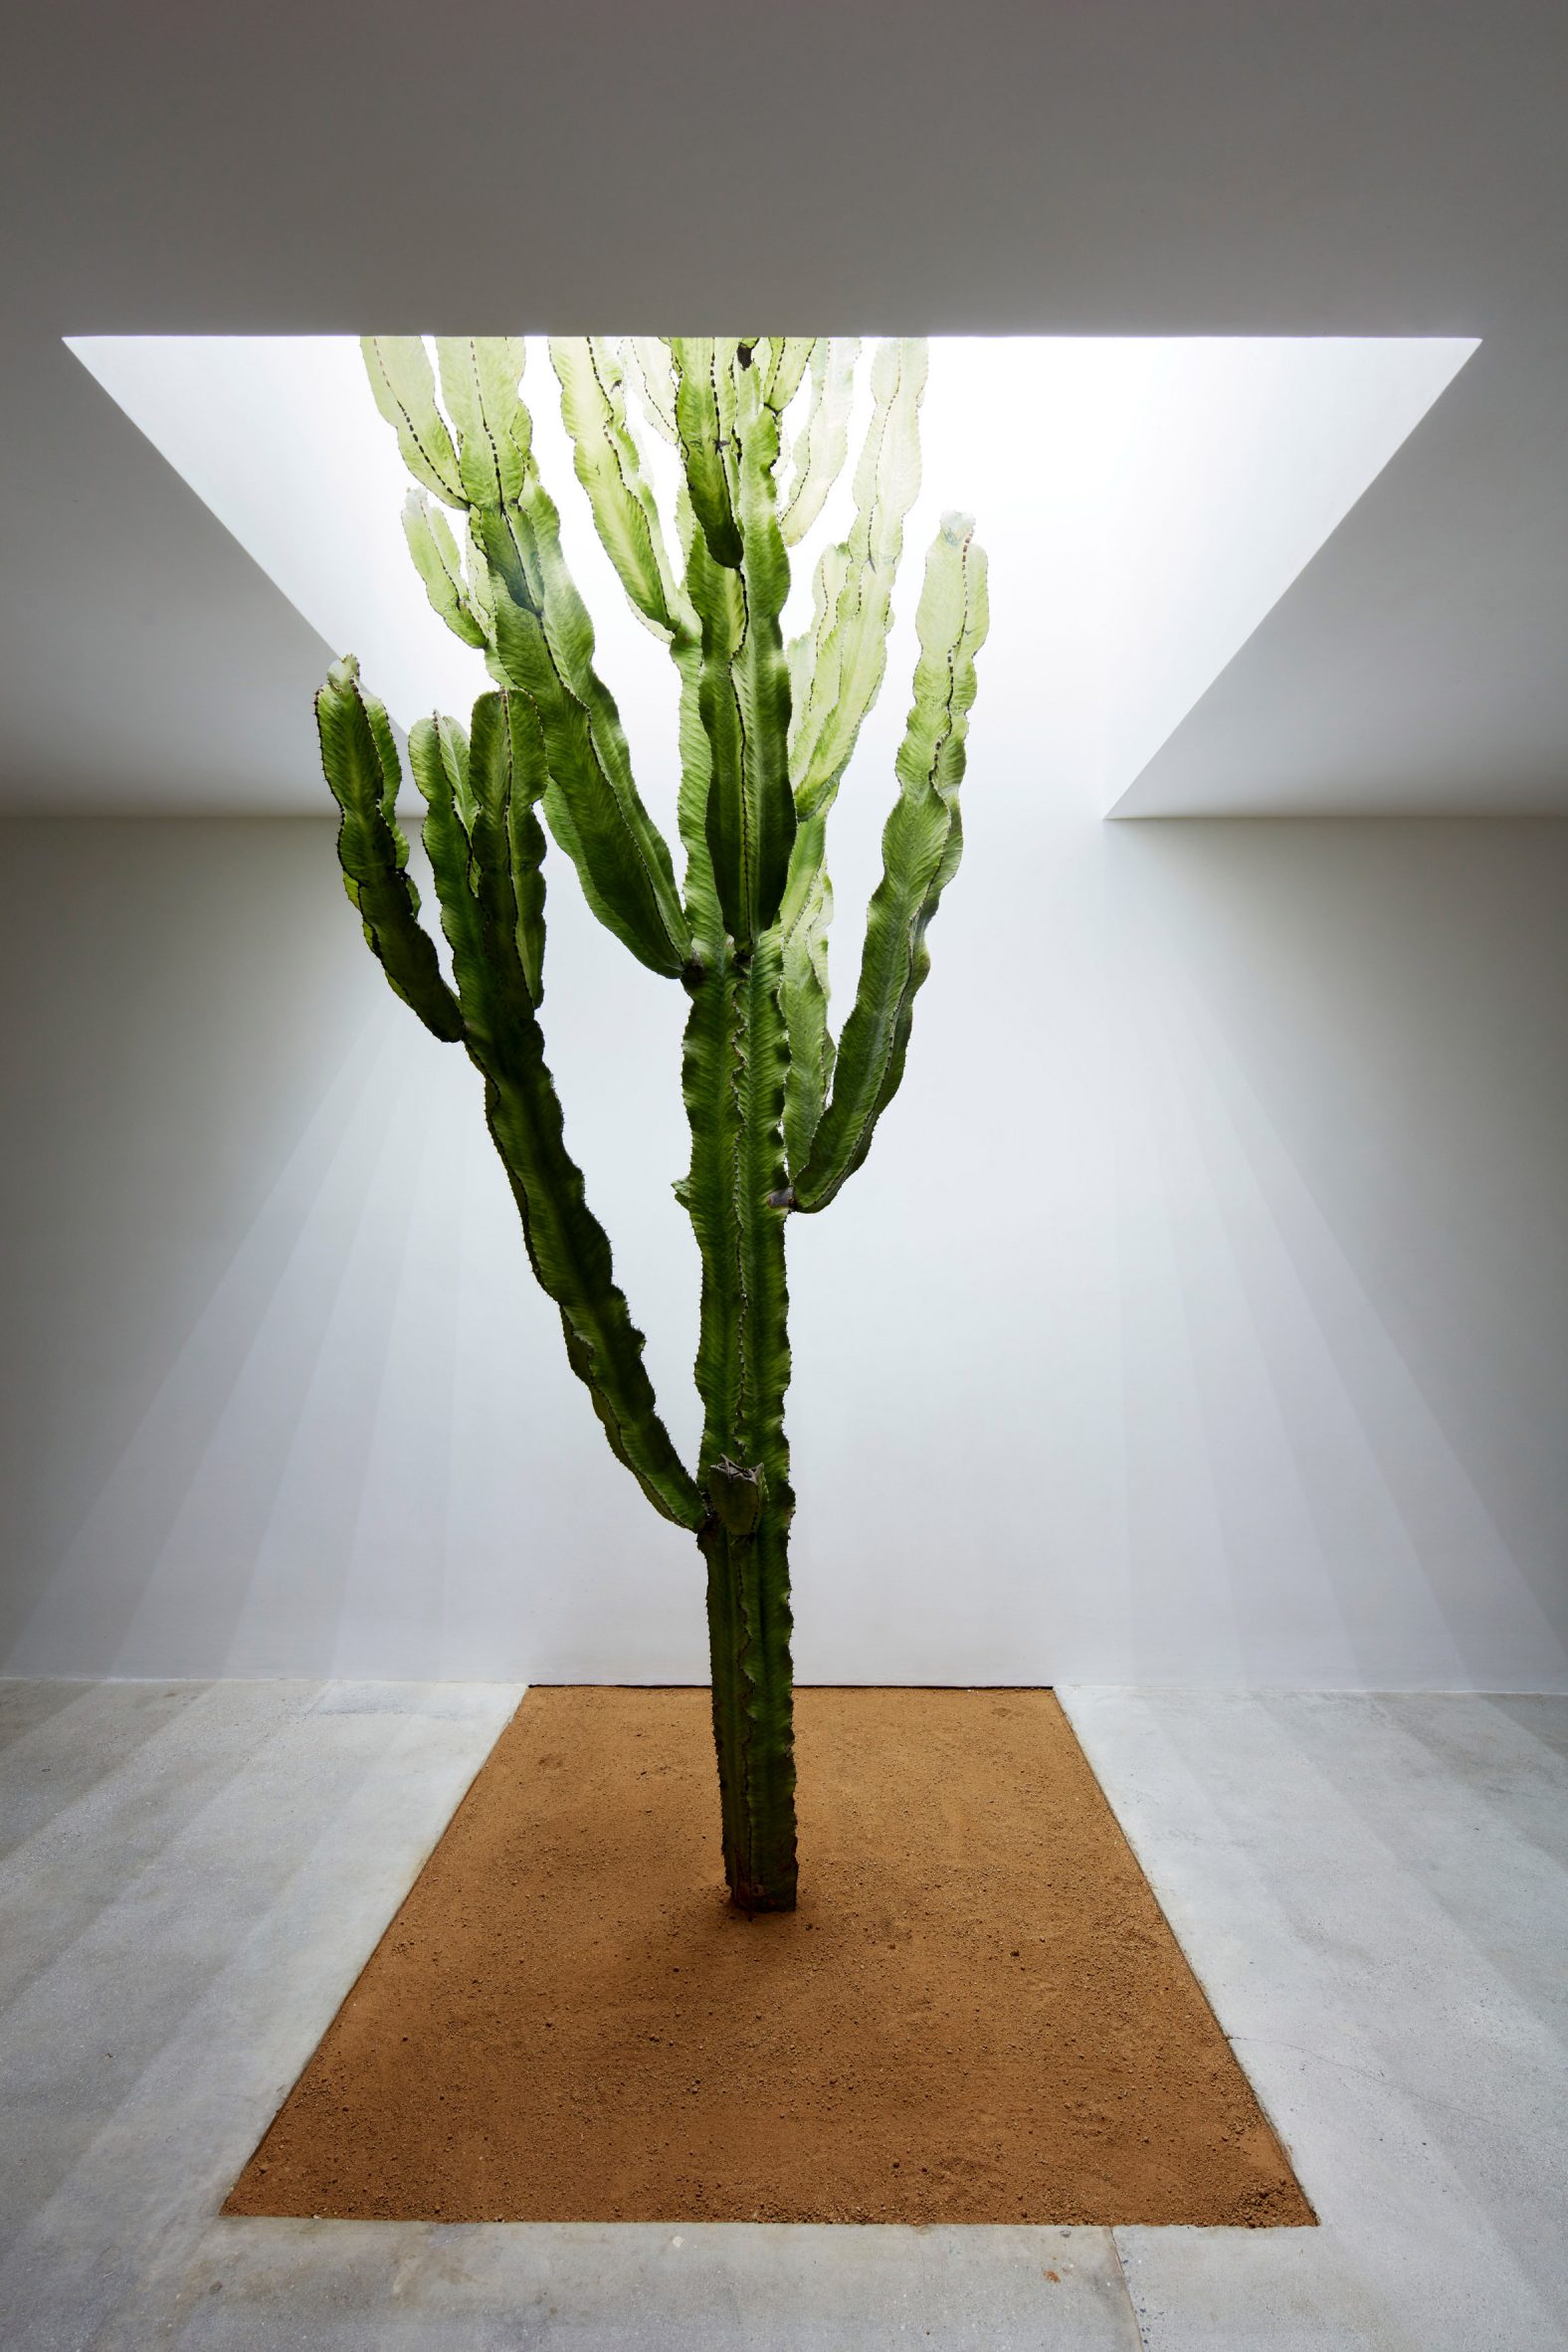 Cactus grows from earth within the light-well of a white-walled home interior